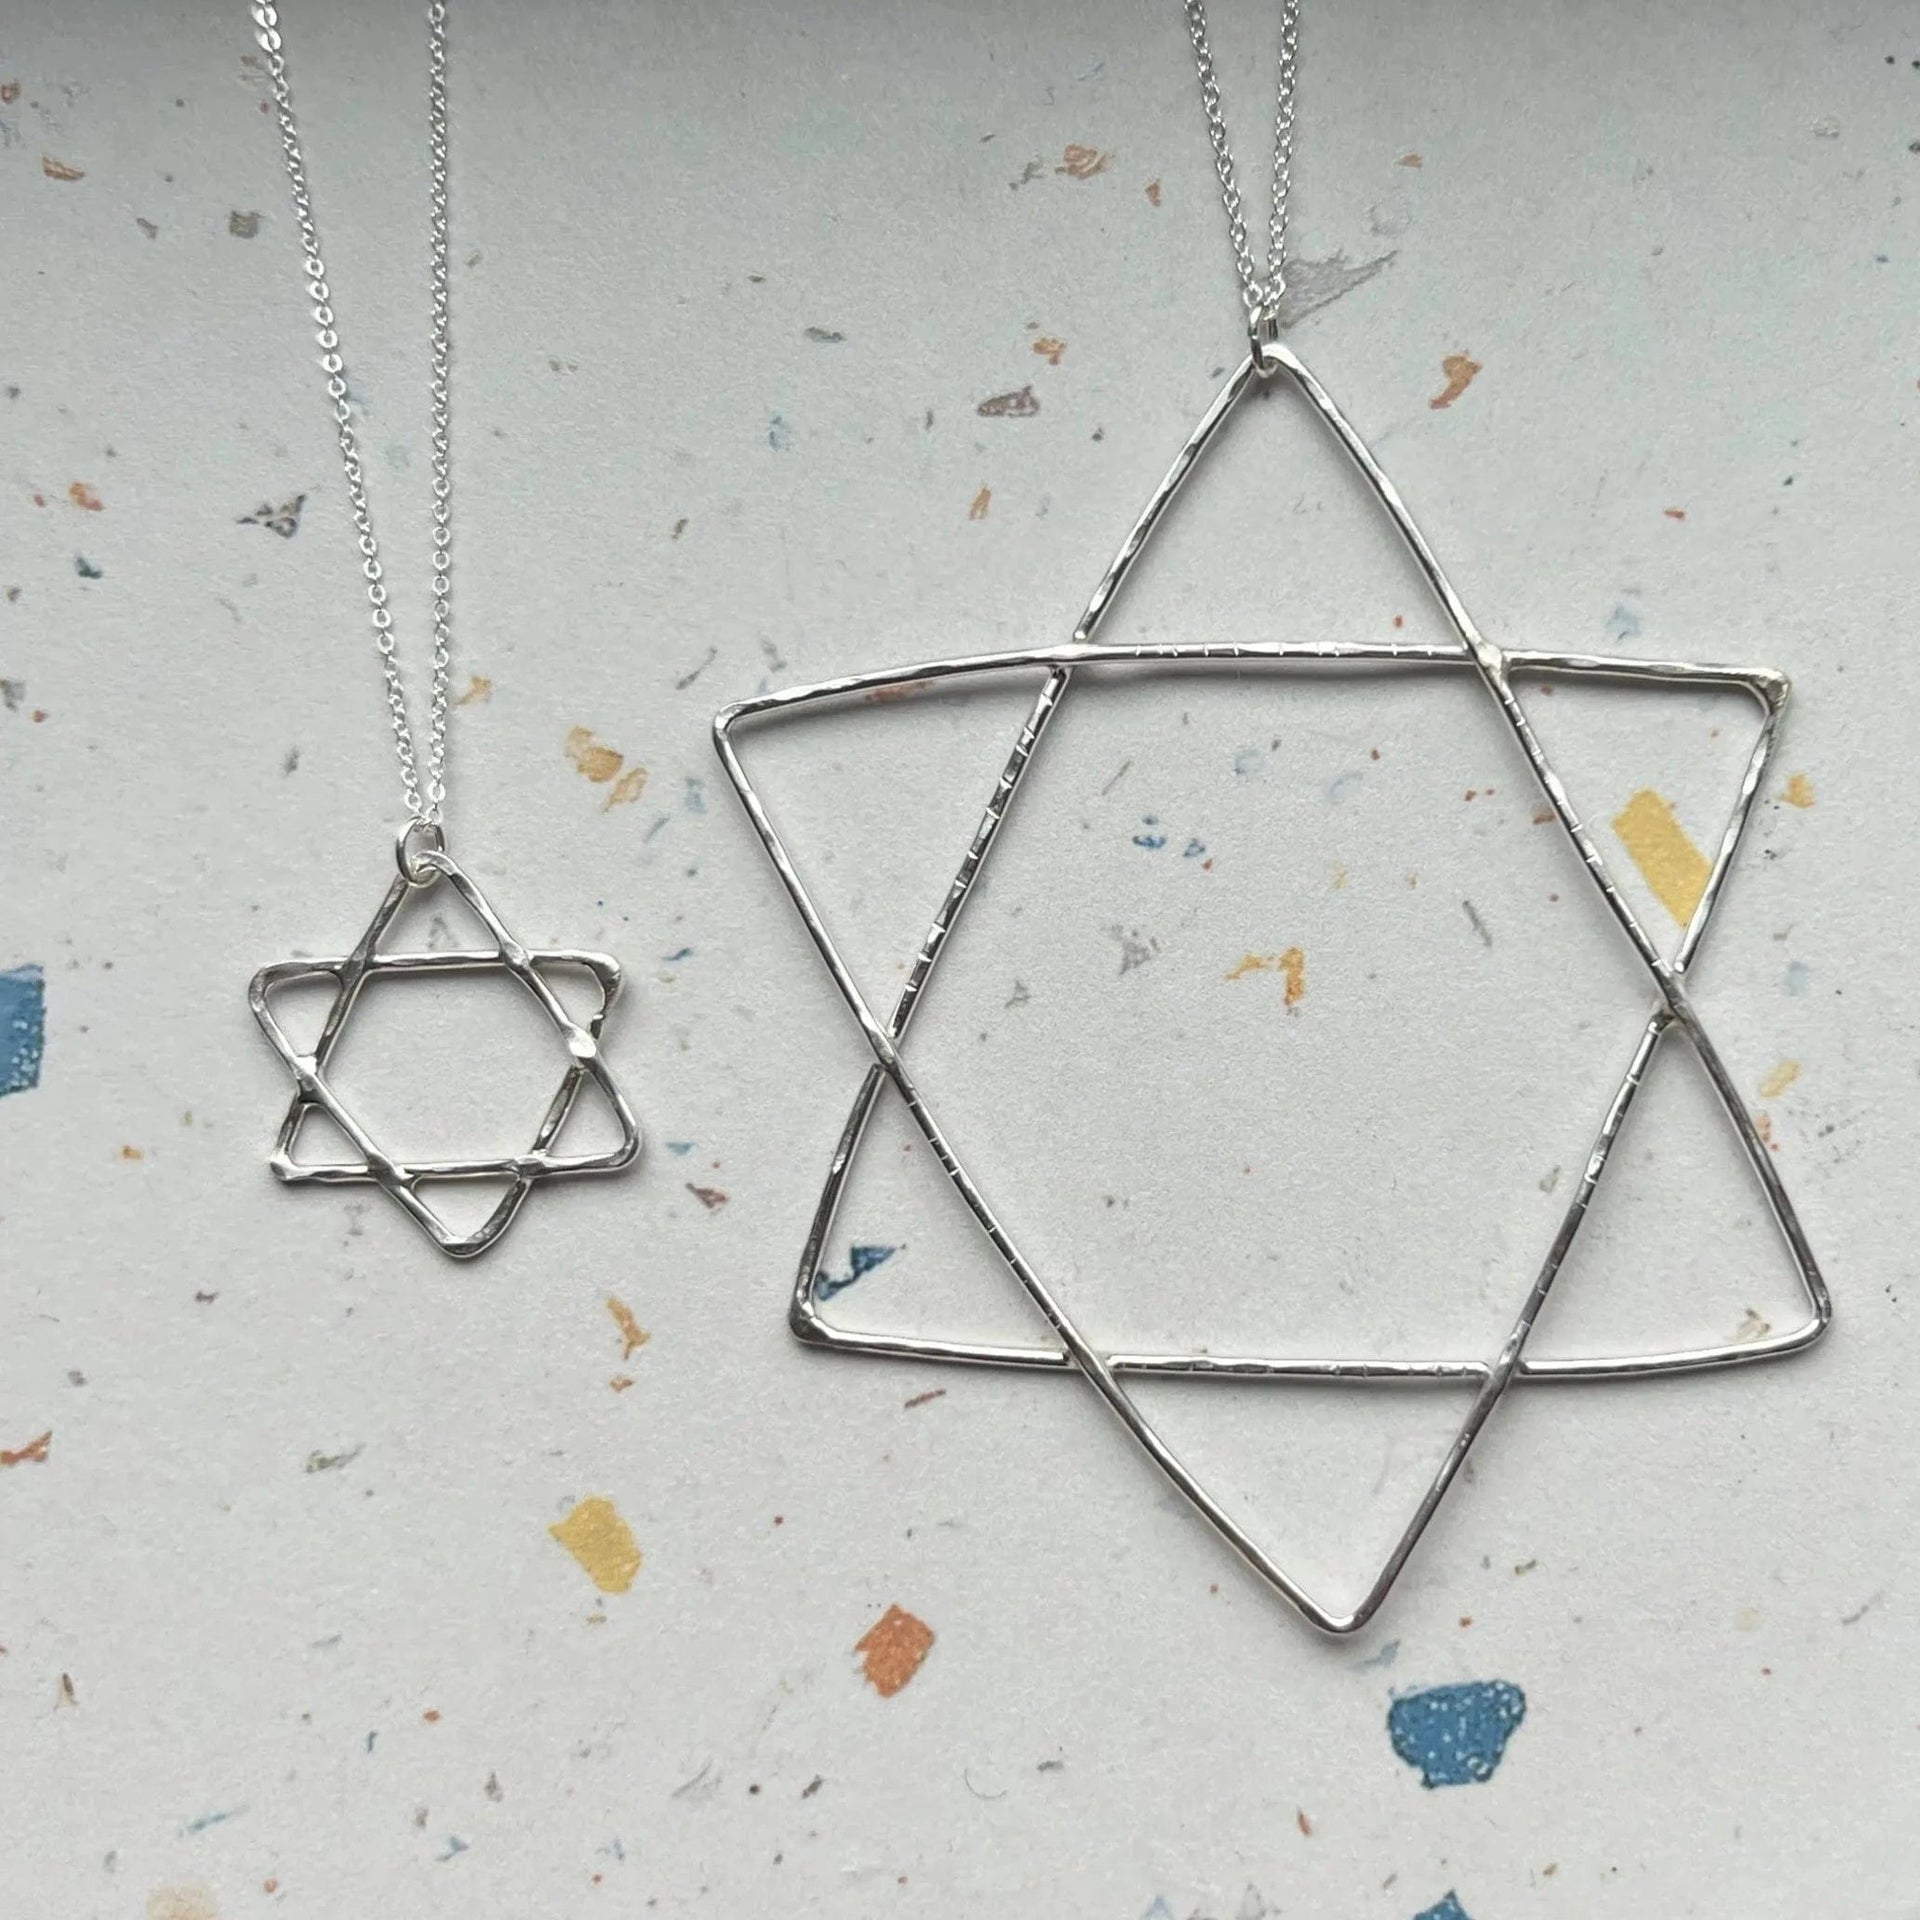 Rachel Pfeffer Necklaces Sterling Silver Handmade Organic Star of David - (Small or Large)